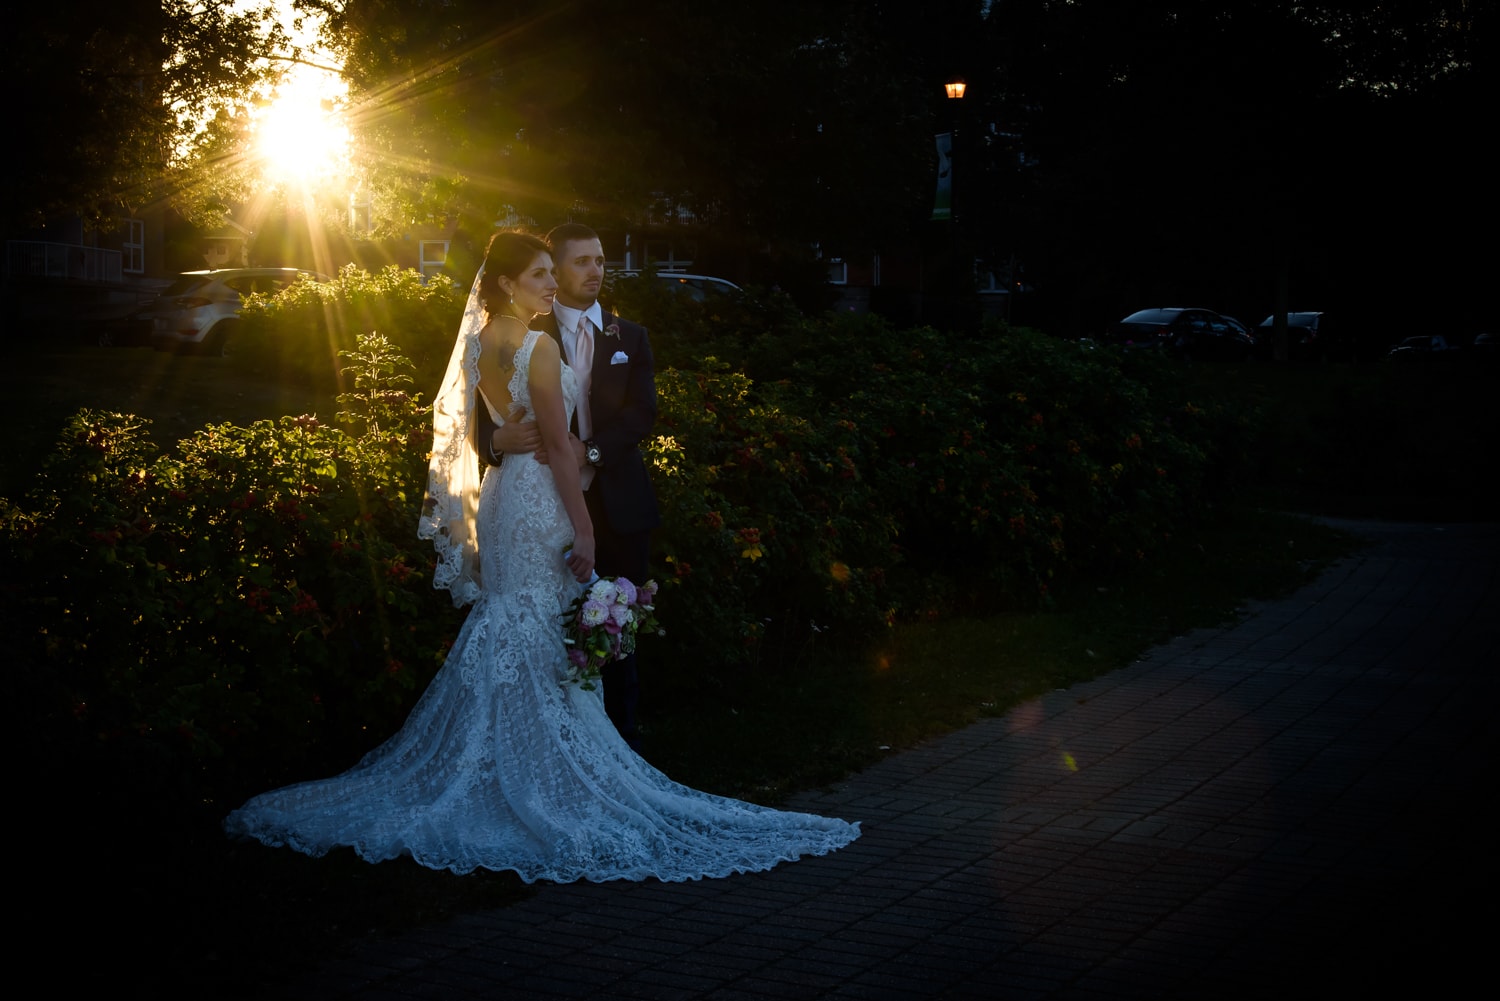 Wedding photography with the bride and groom at sunset in DeWolfe park Halifax.